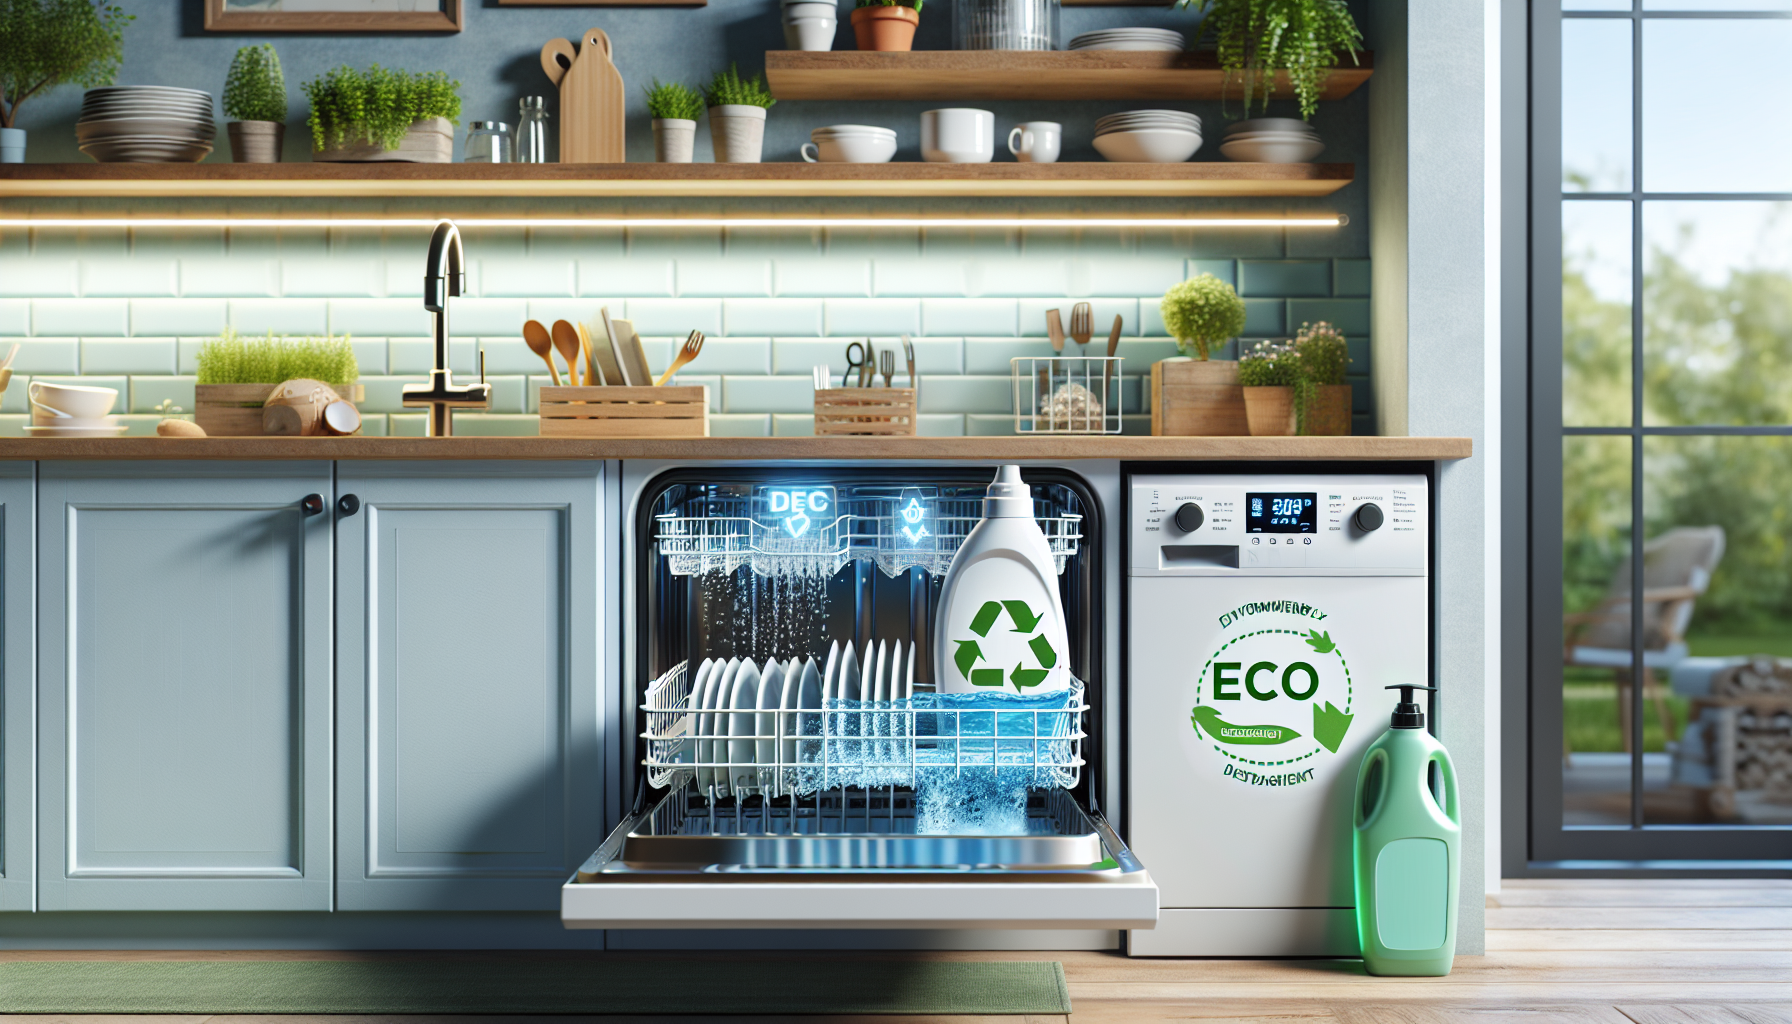 Top Tips For Maintaining An Eco-friendly Dishwasher